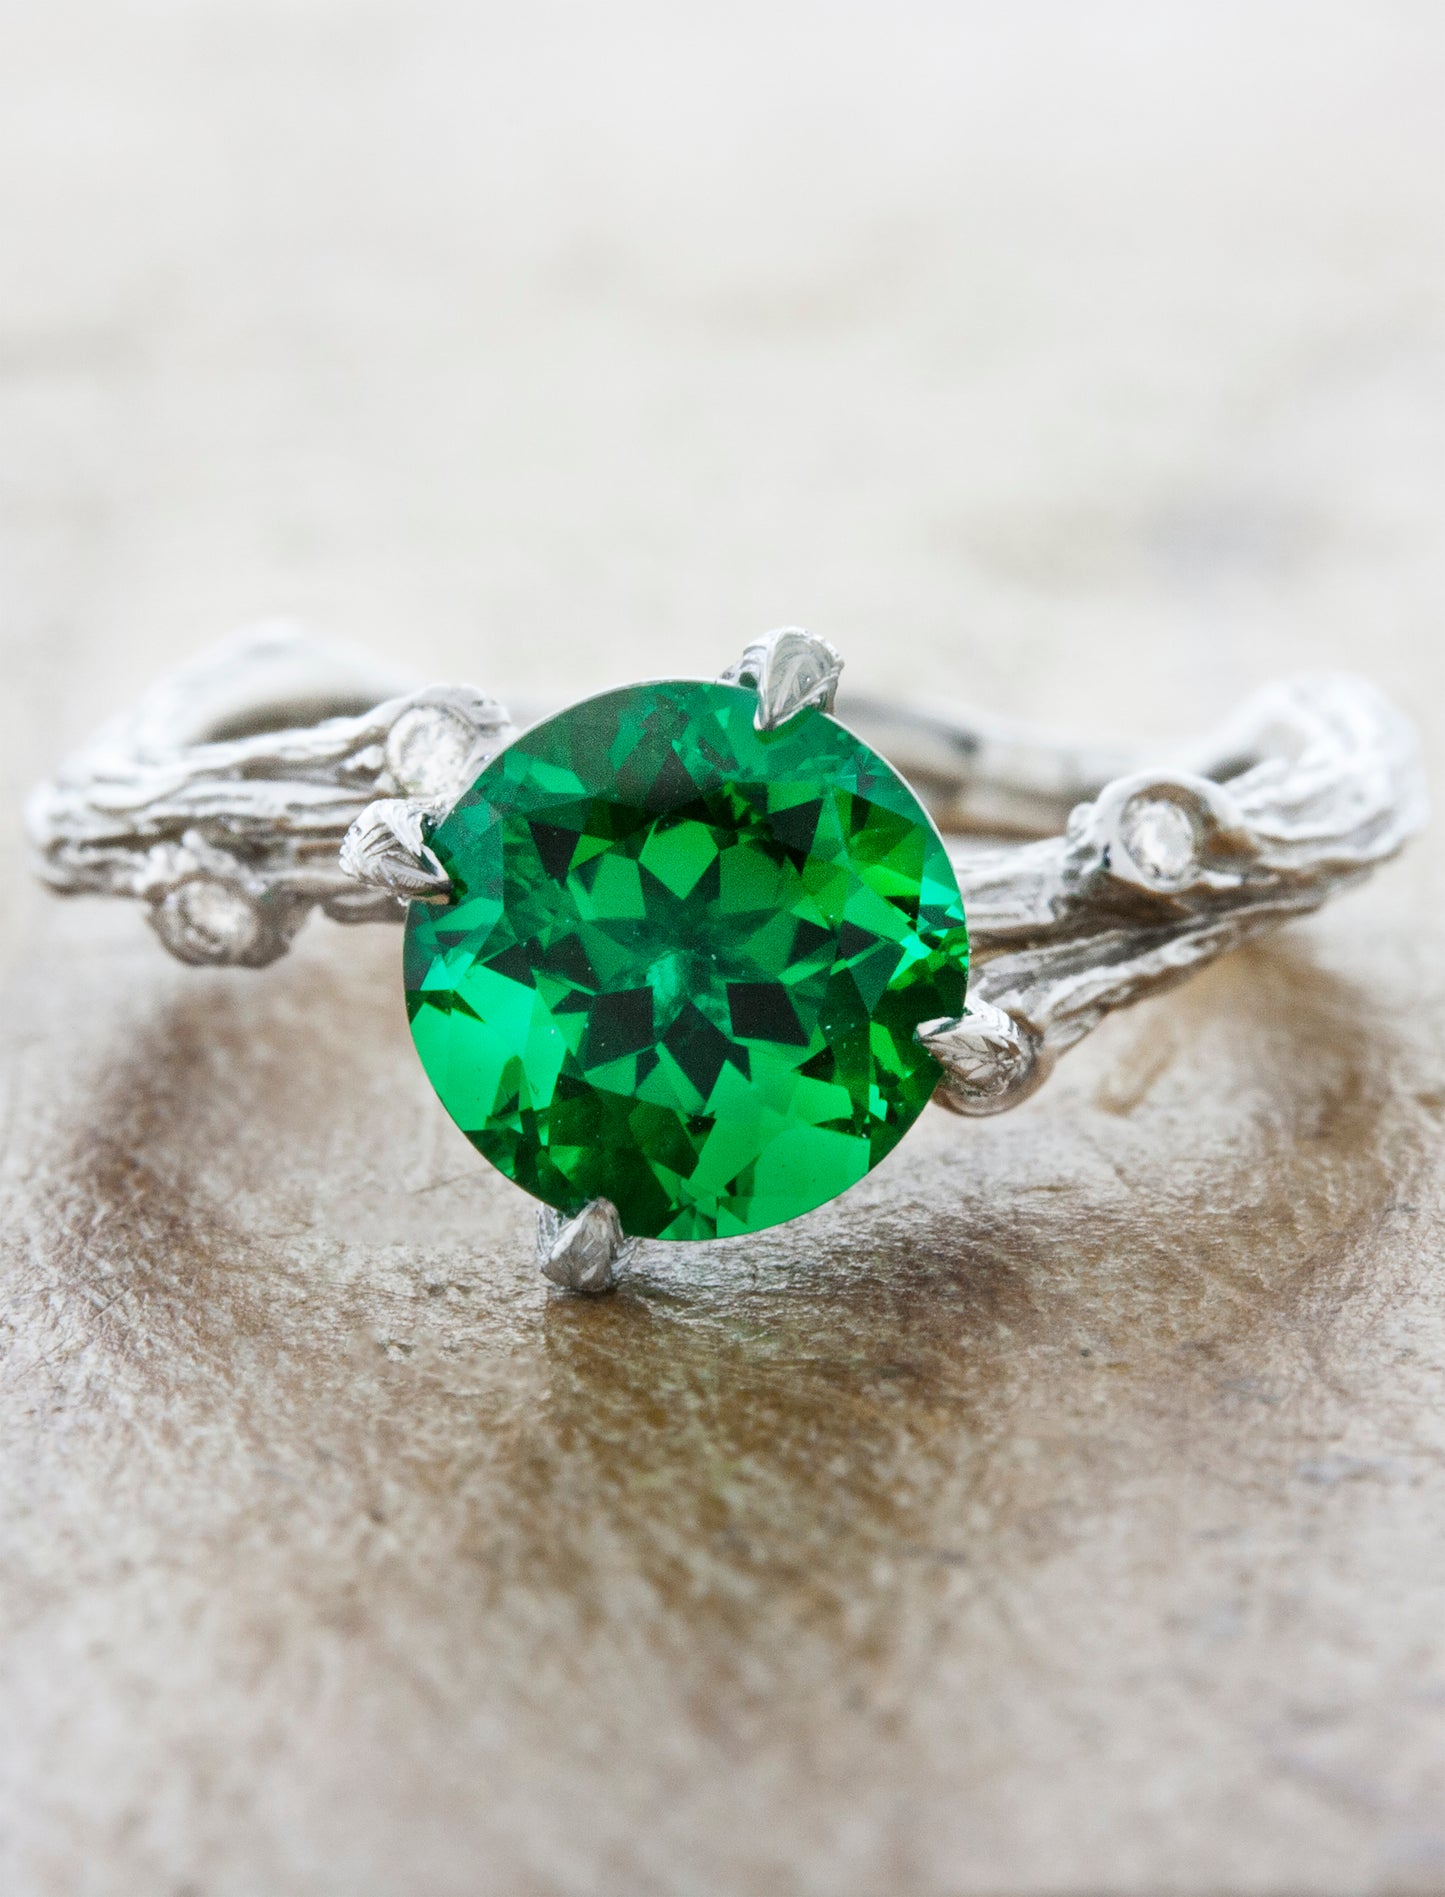 caption:Customized with a cultured emerald